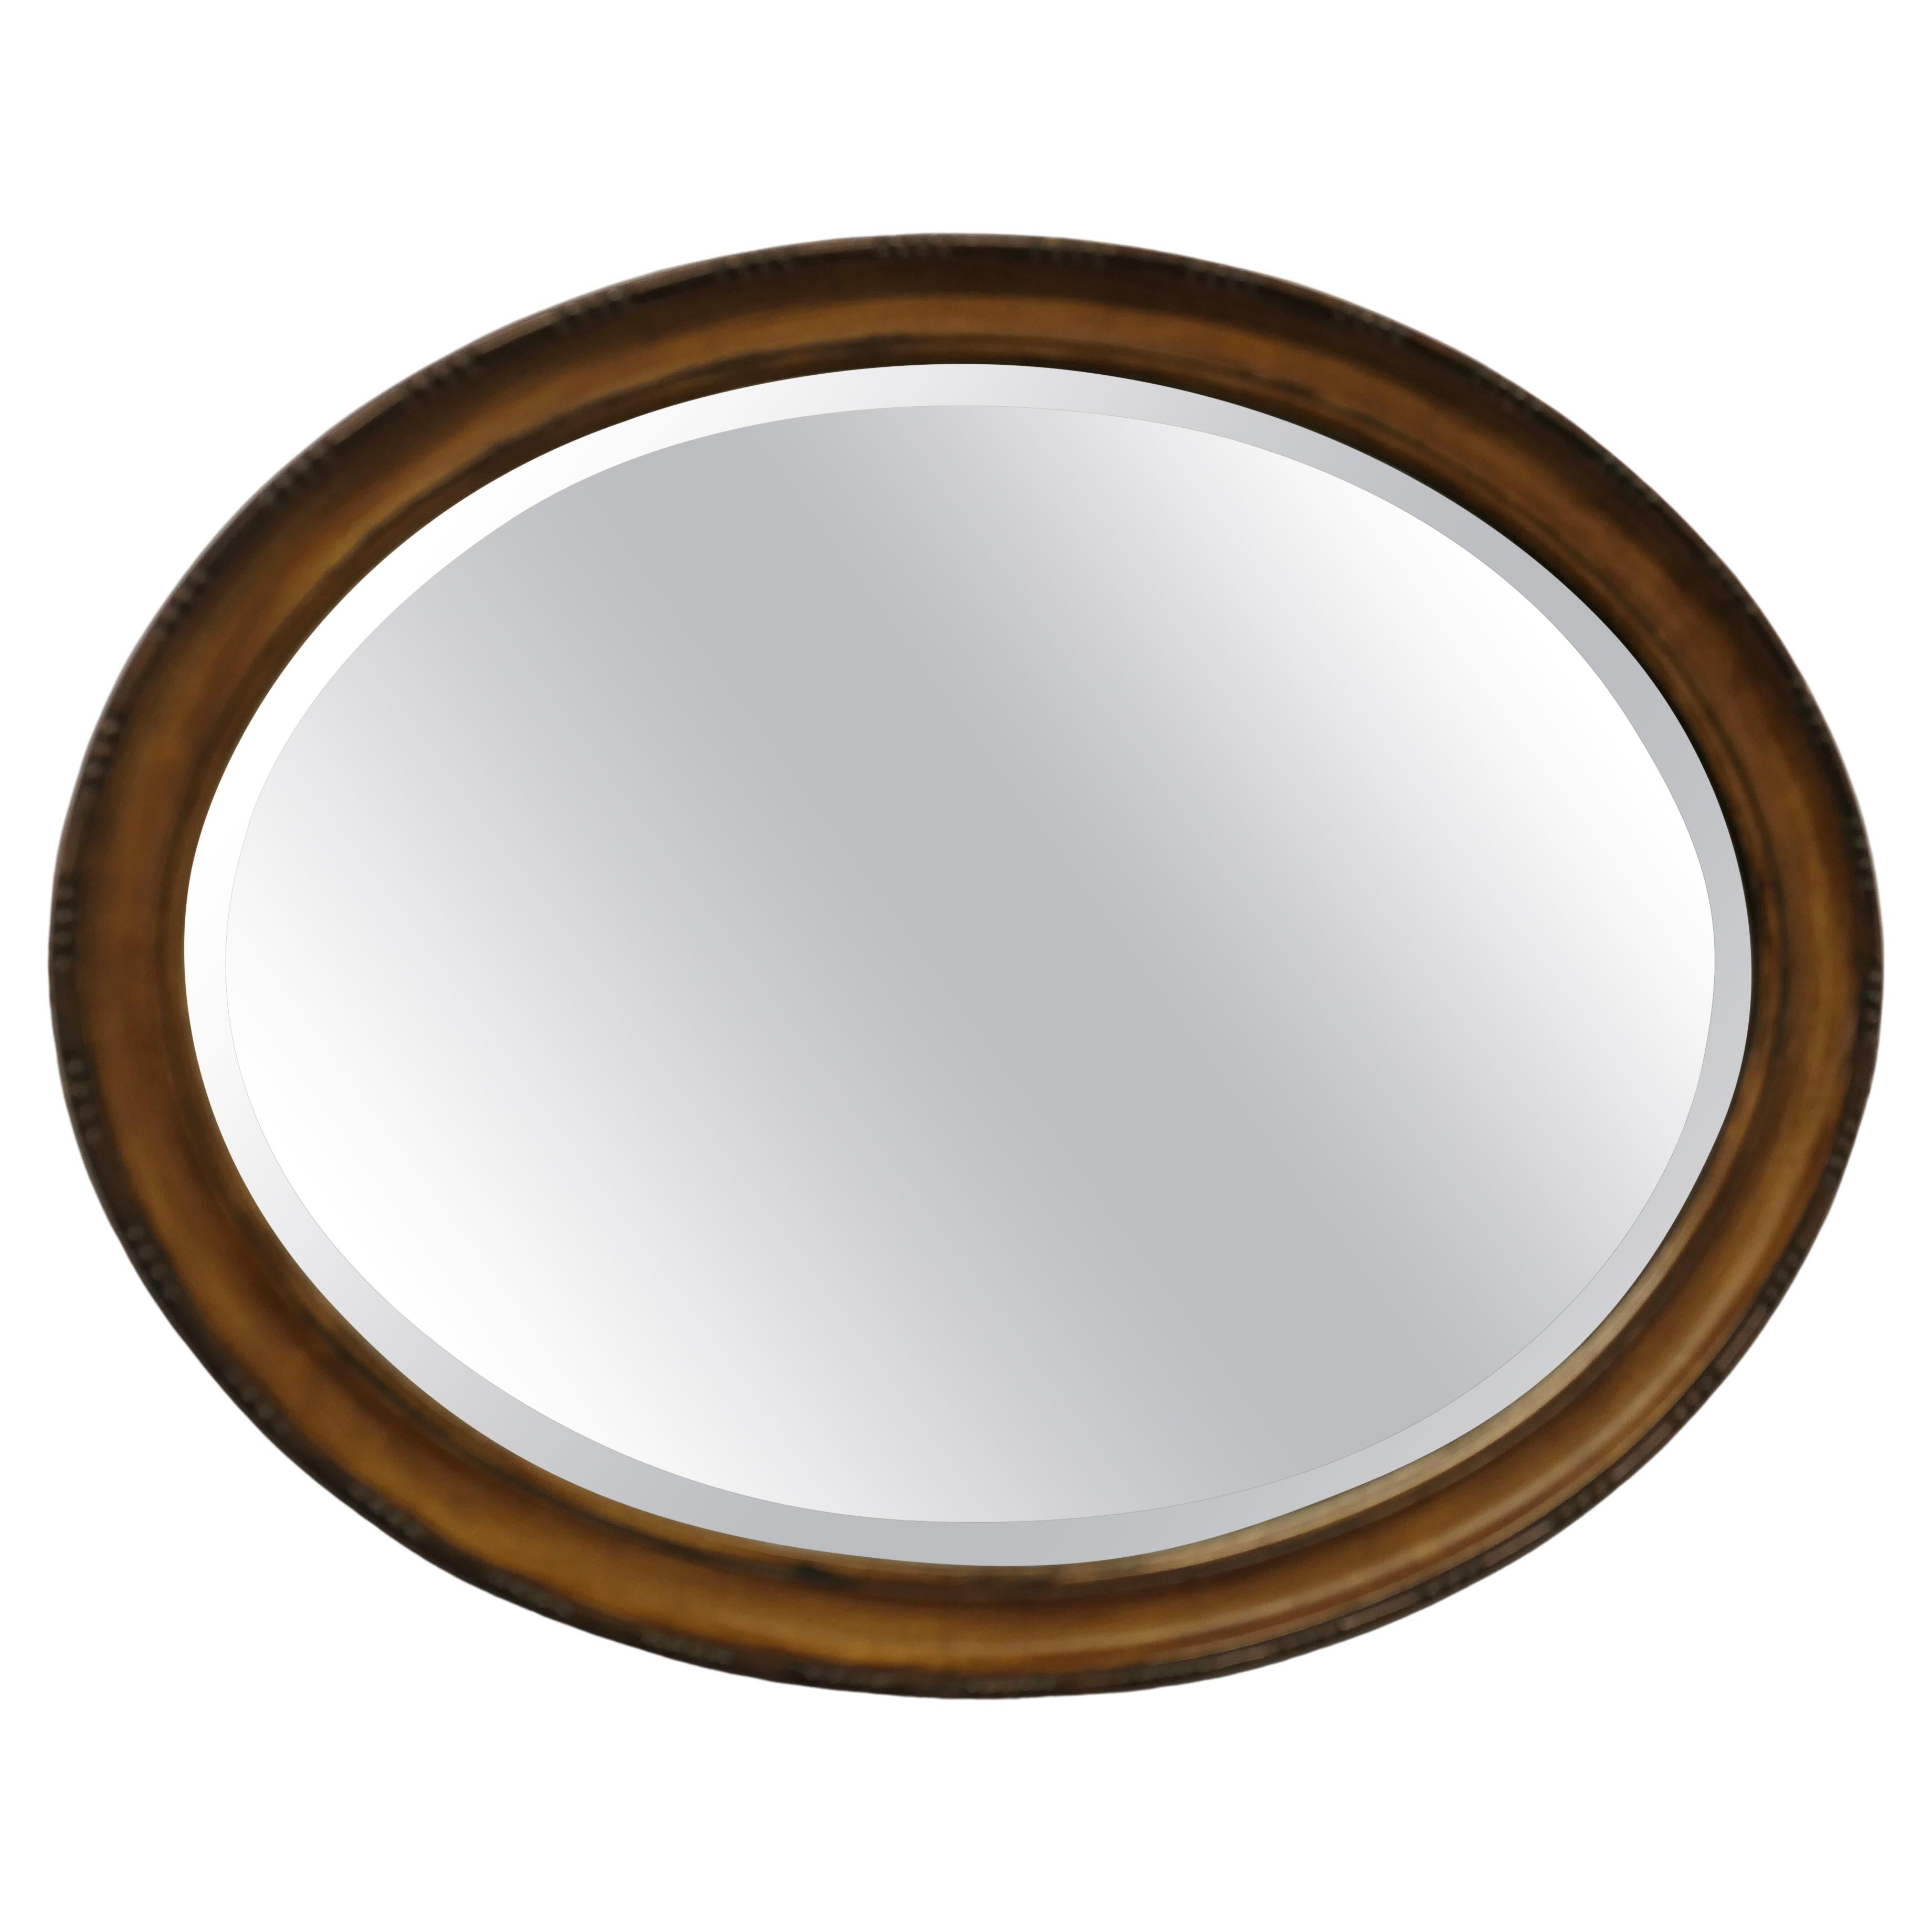 Scumble Finish Oval Mirror This Mirror Has a Moulded Oval Frame For Sale